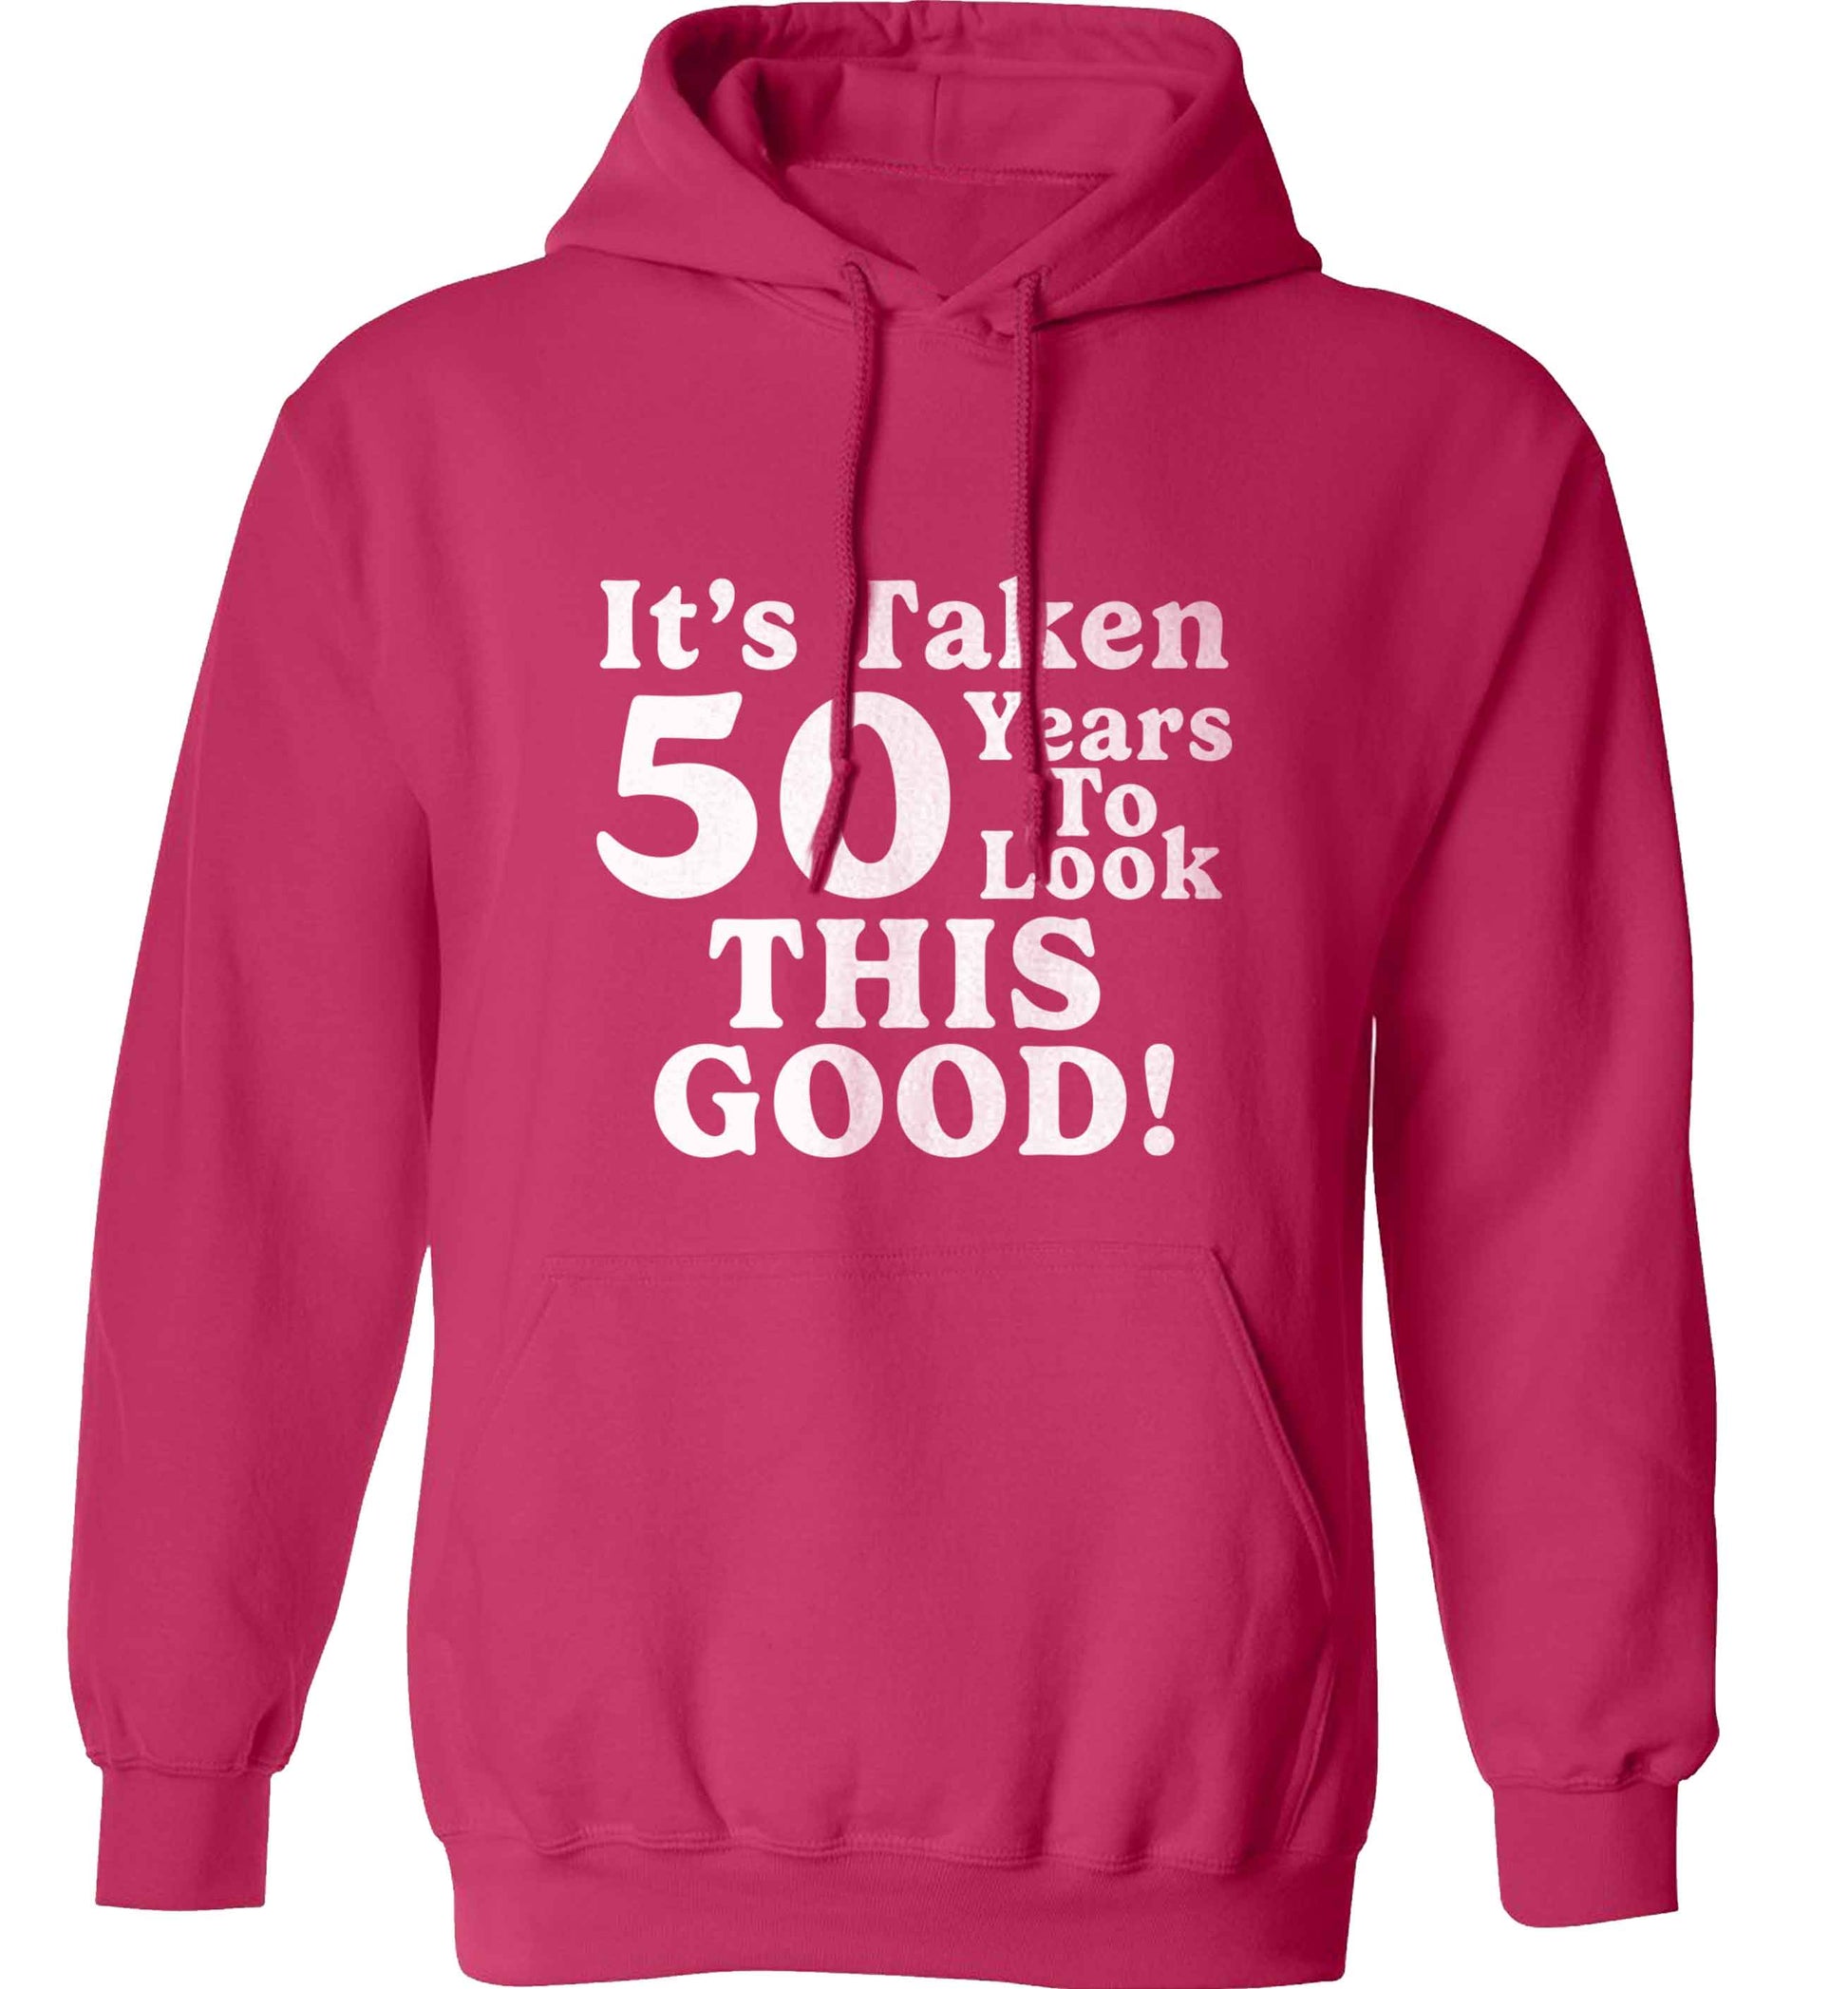 It's taken 50 years to look this good! adults unisex pink hoodie 2XL